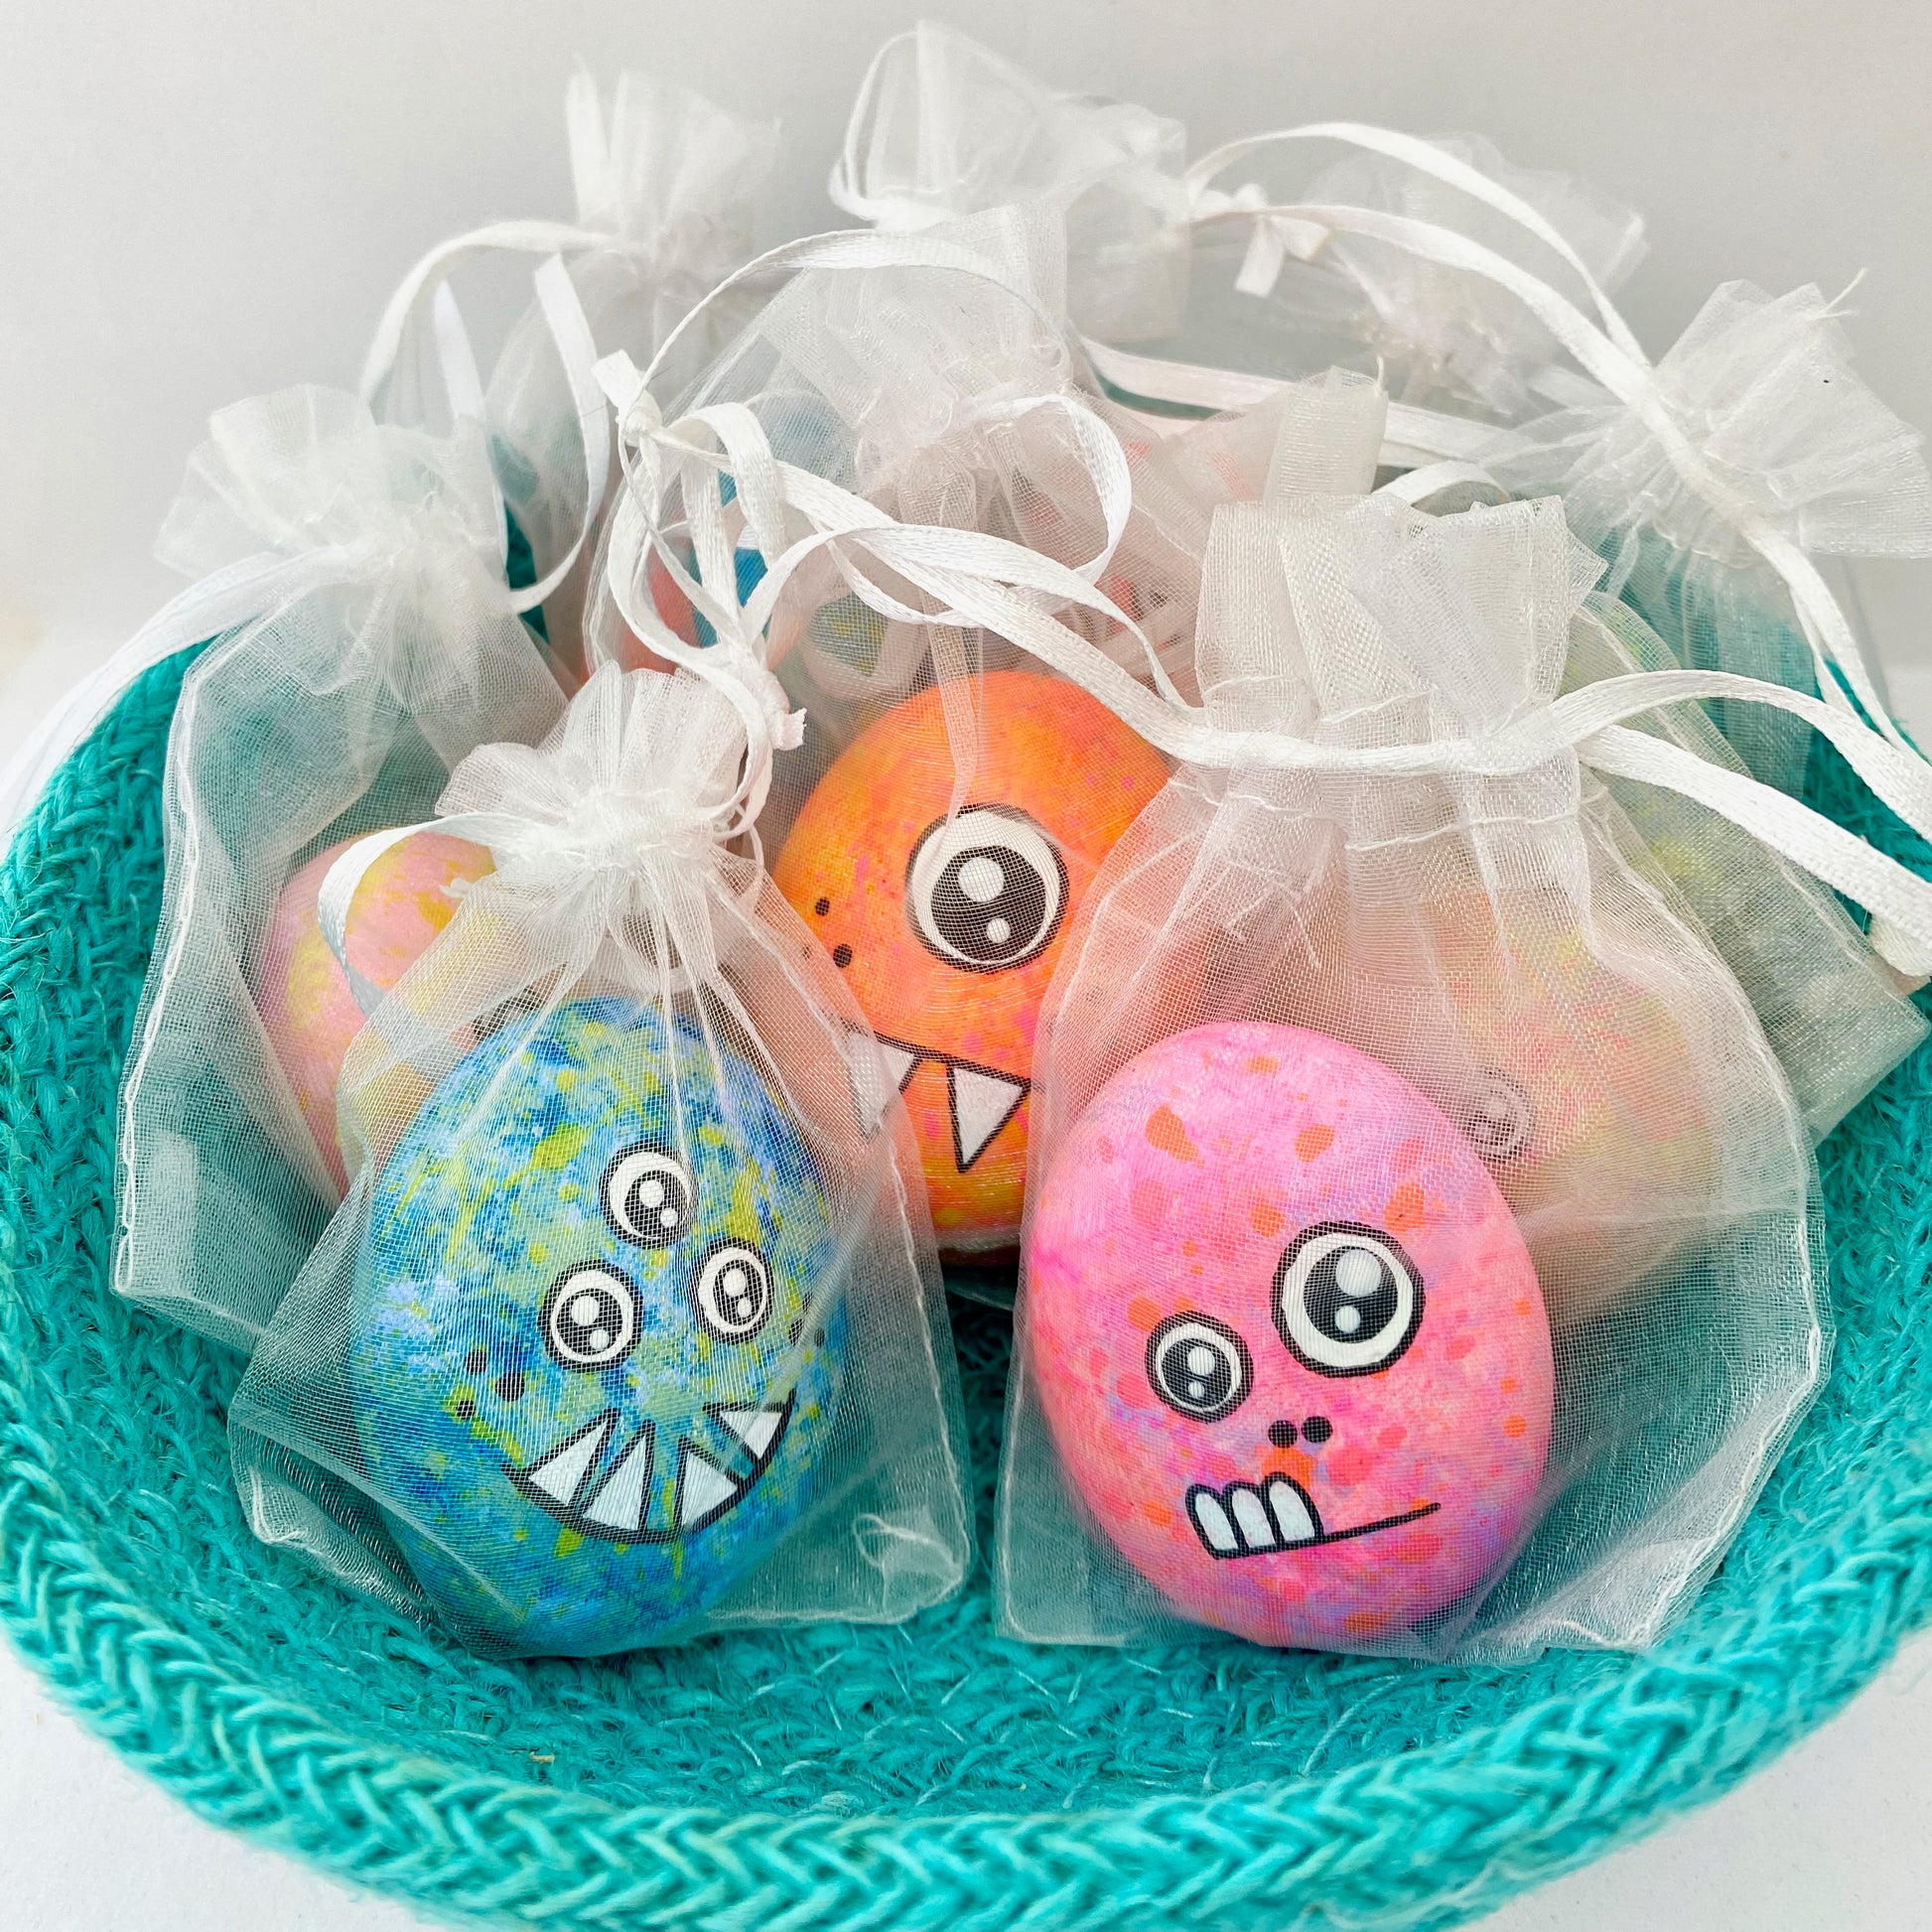 Lots of hand painted Pocket Monster pebbles in organza bags in a bowl